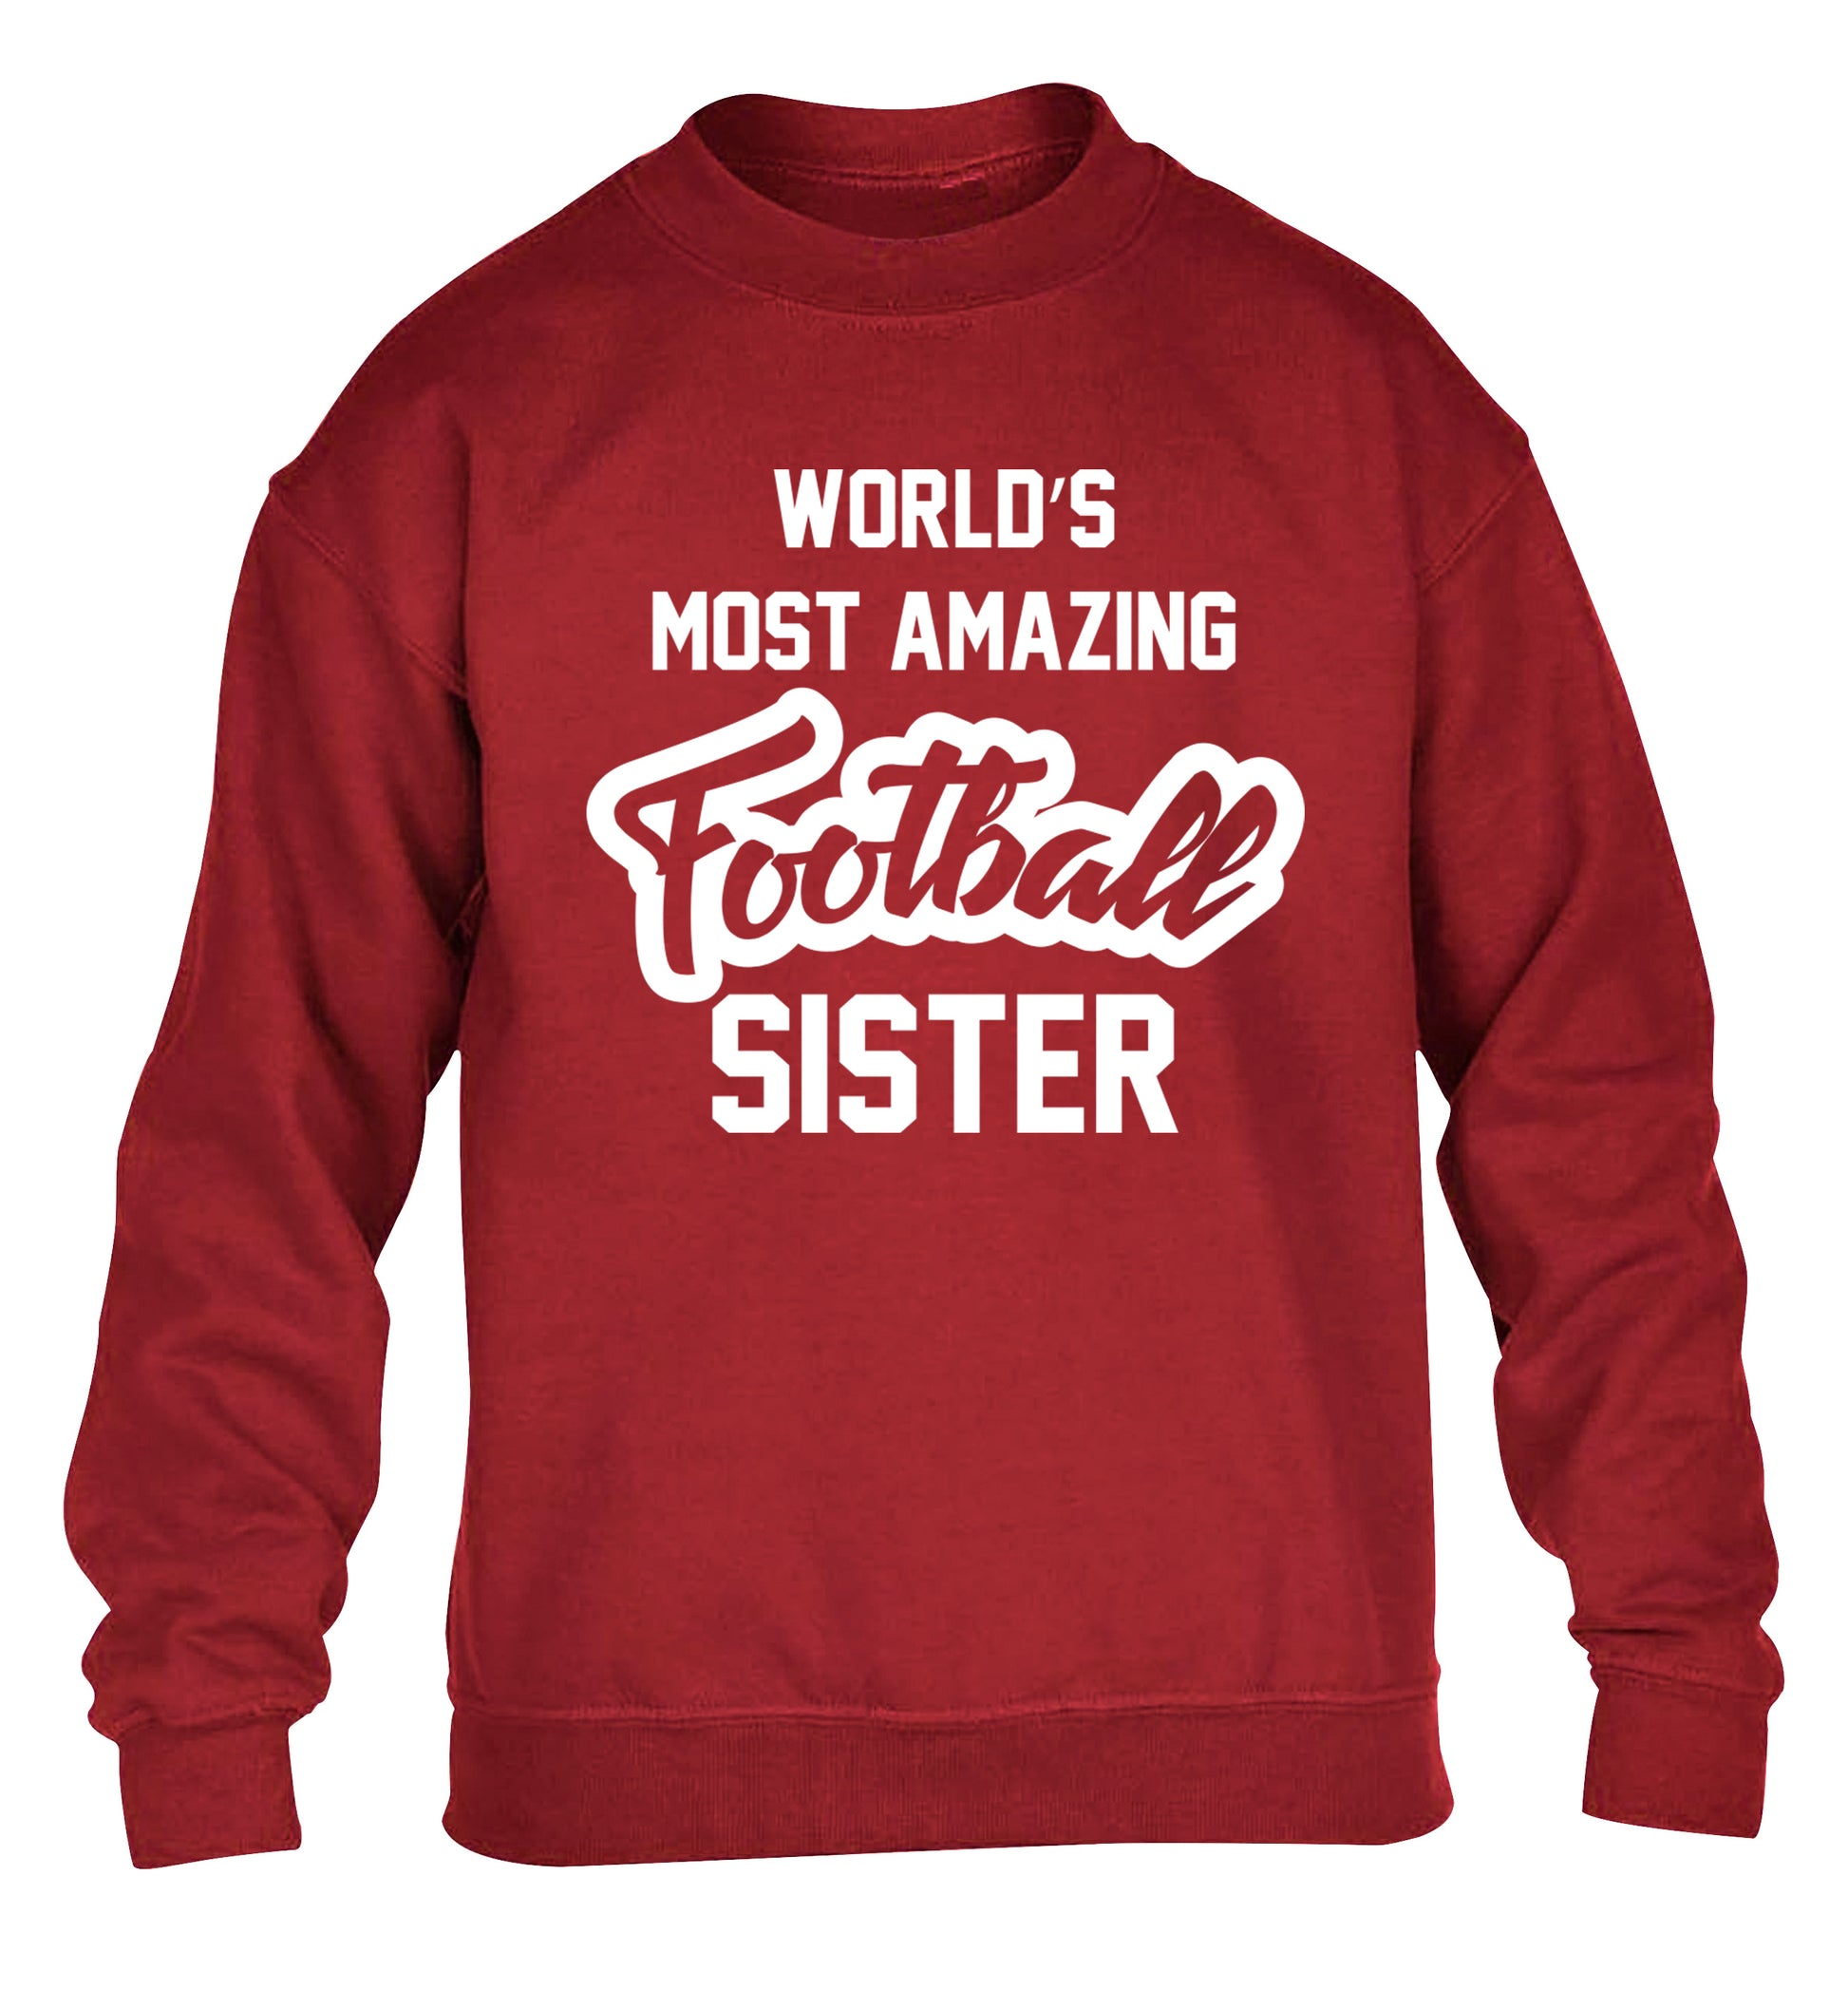 Worlds most amazing football sister children's grey sweater 12-14 Years